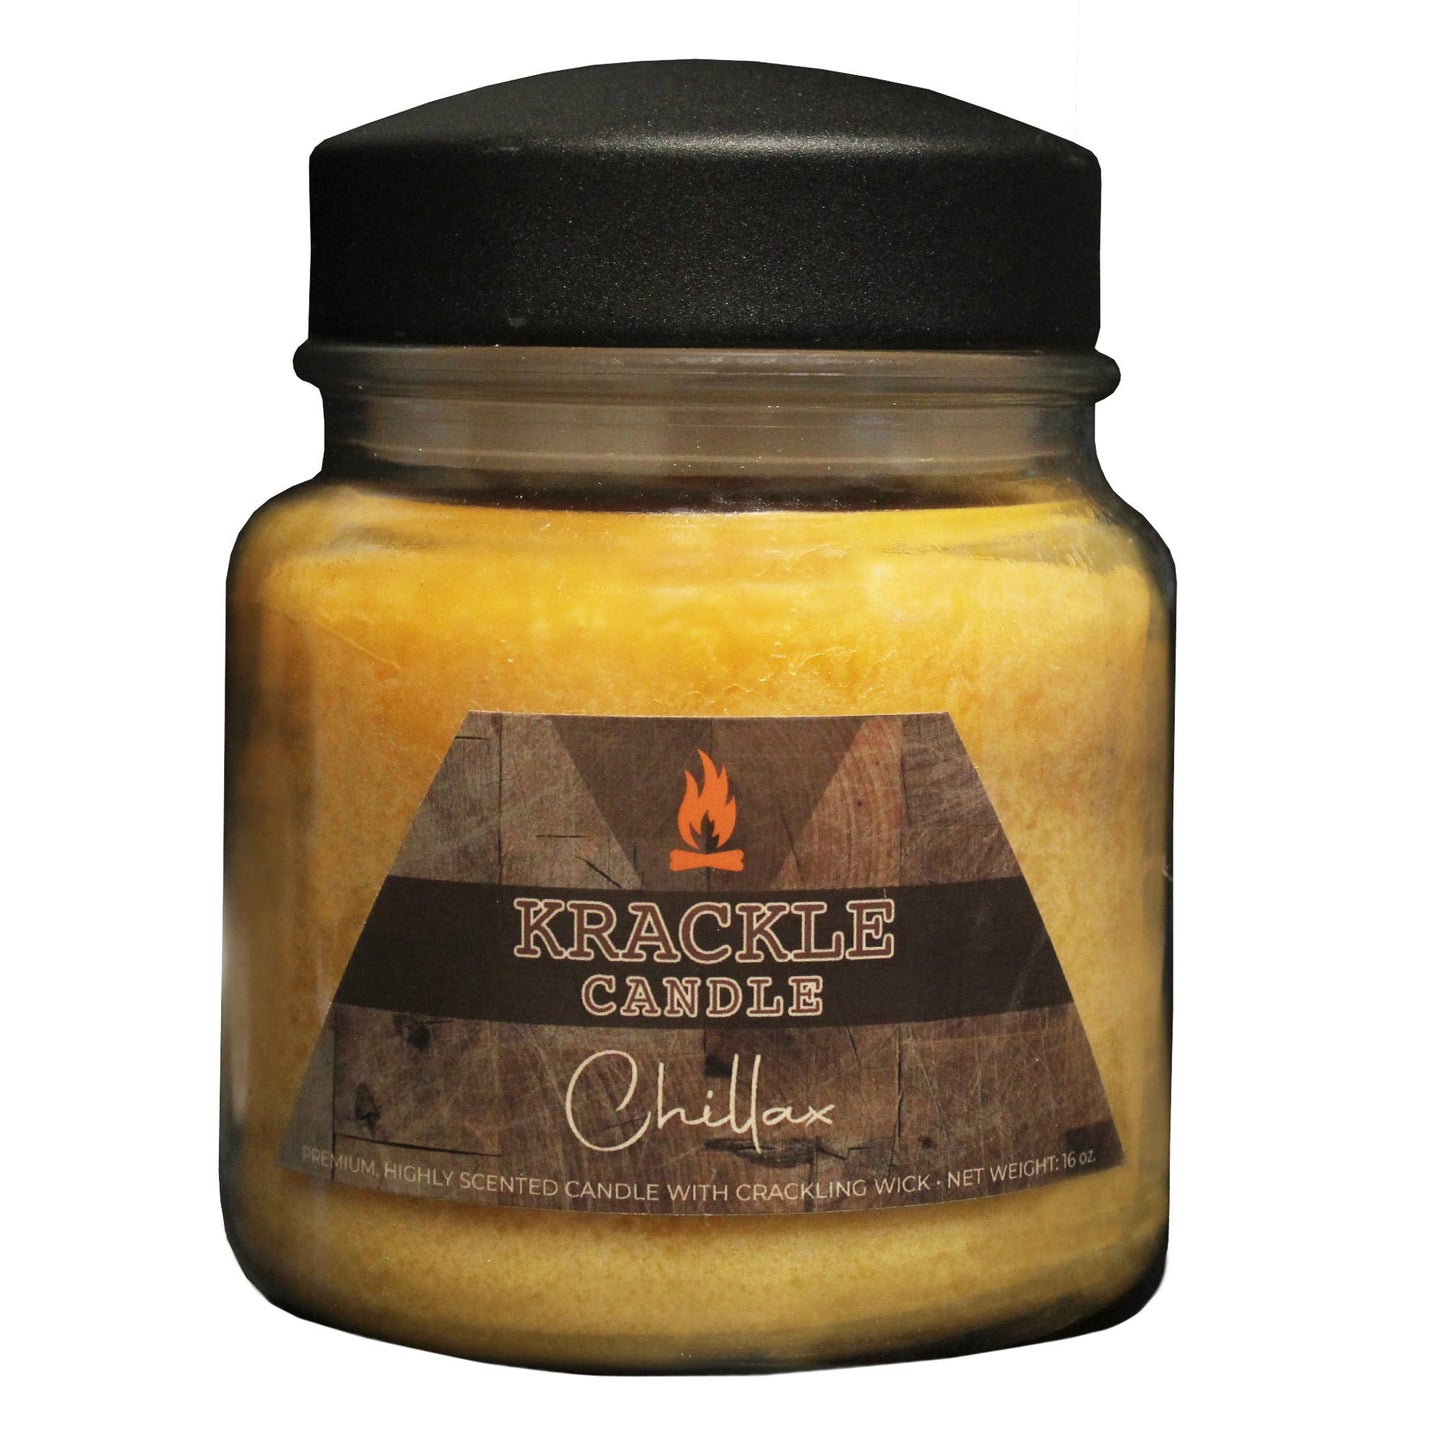 Chillax Krackle Candle